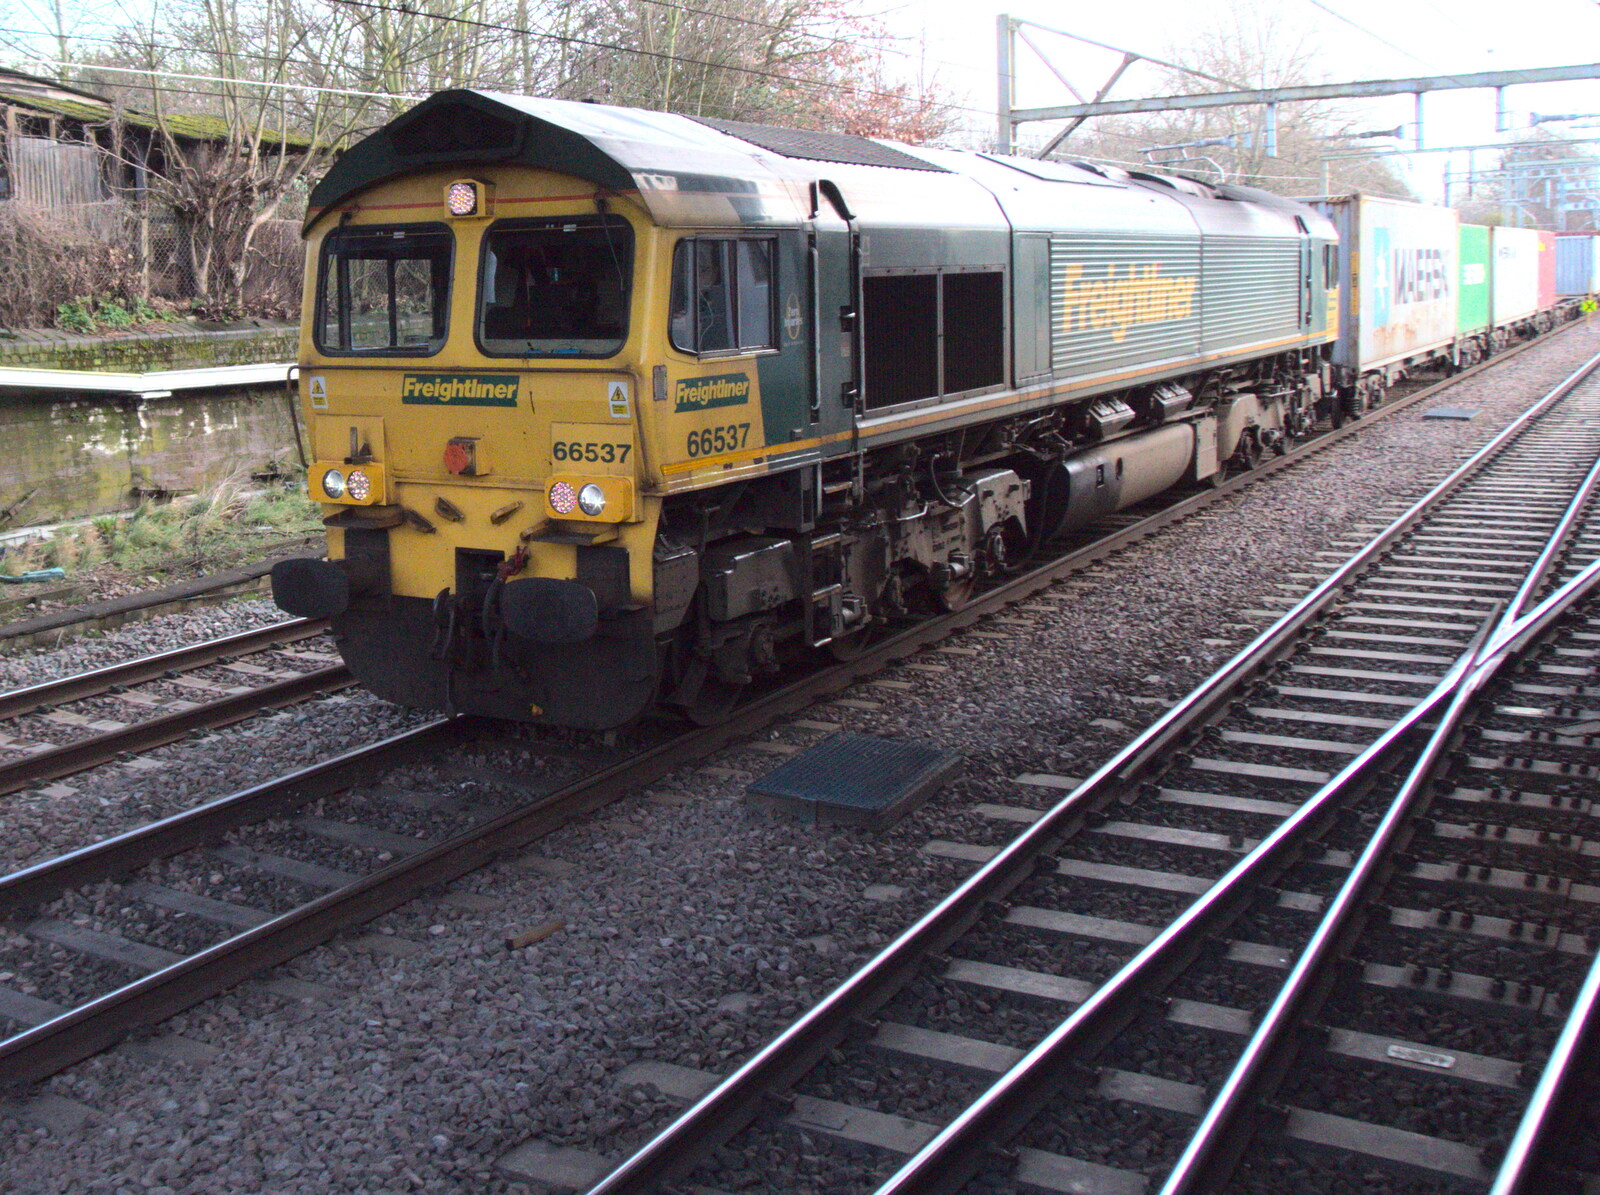 Broken-down Freight Trains, Manor Park, London - 28th January 2020: 66537 has broken down and delayed everything